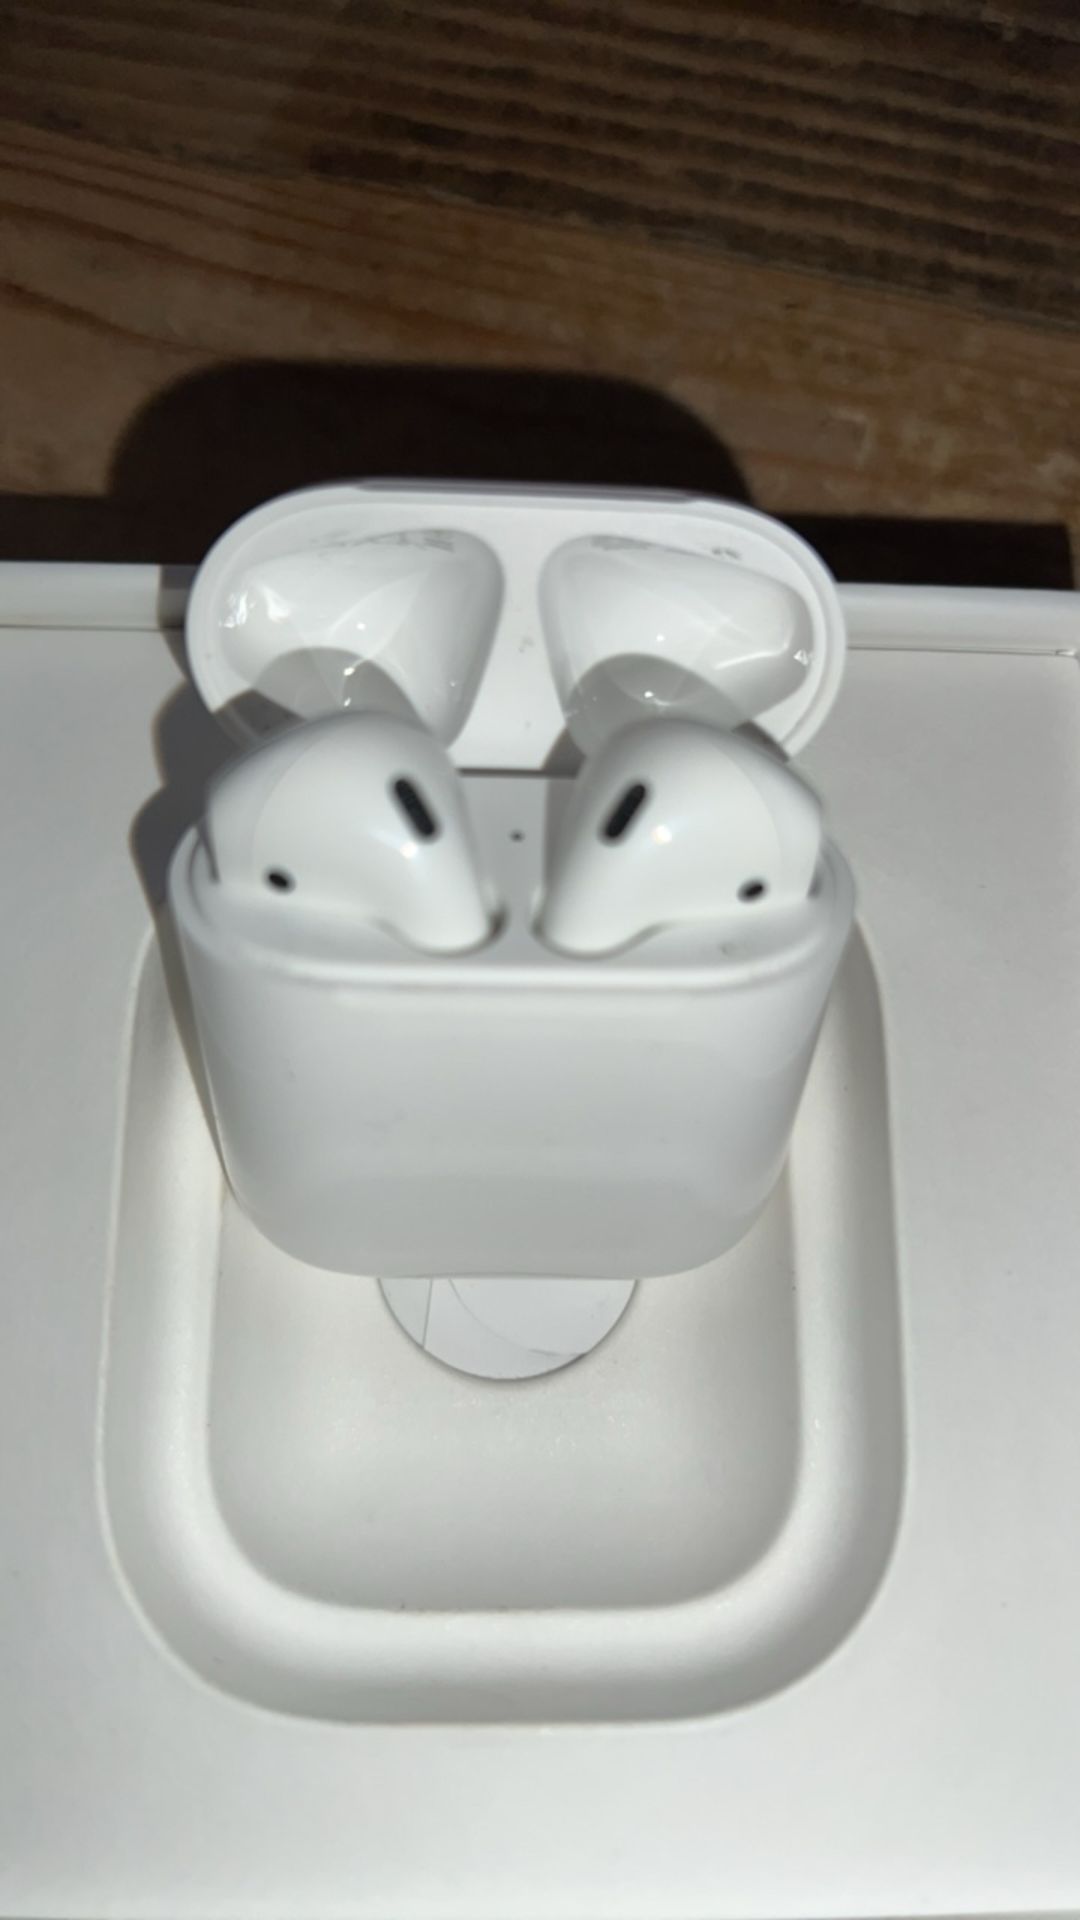 Apple Air Pods Charging Case Included - Image 2 of 5